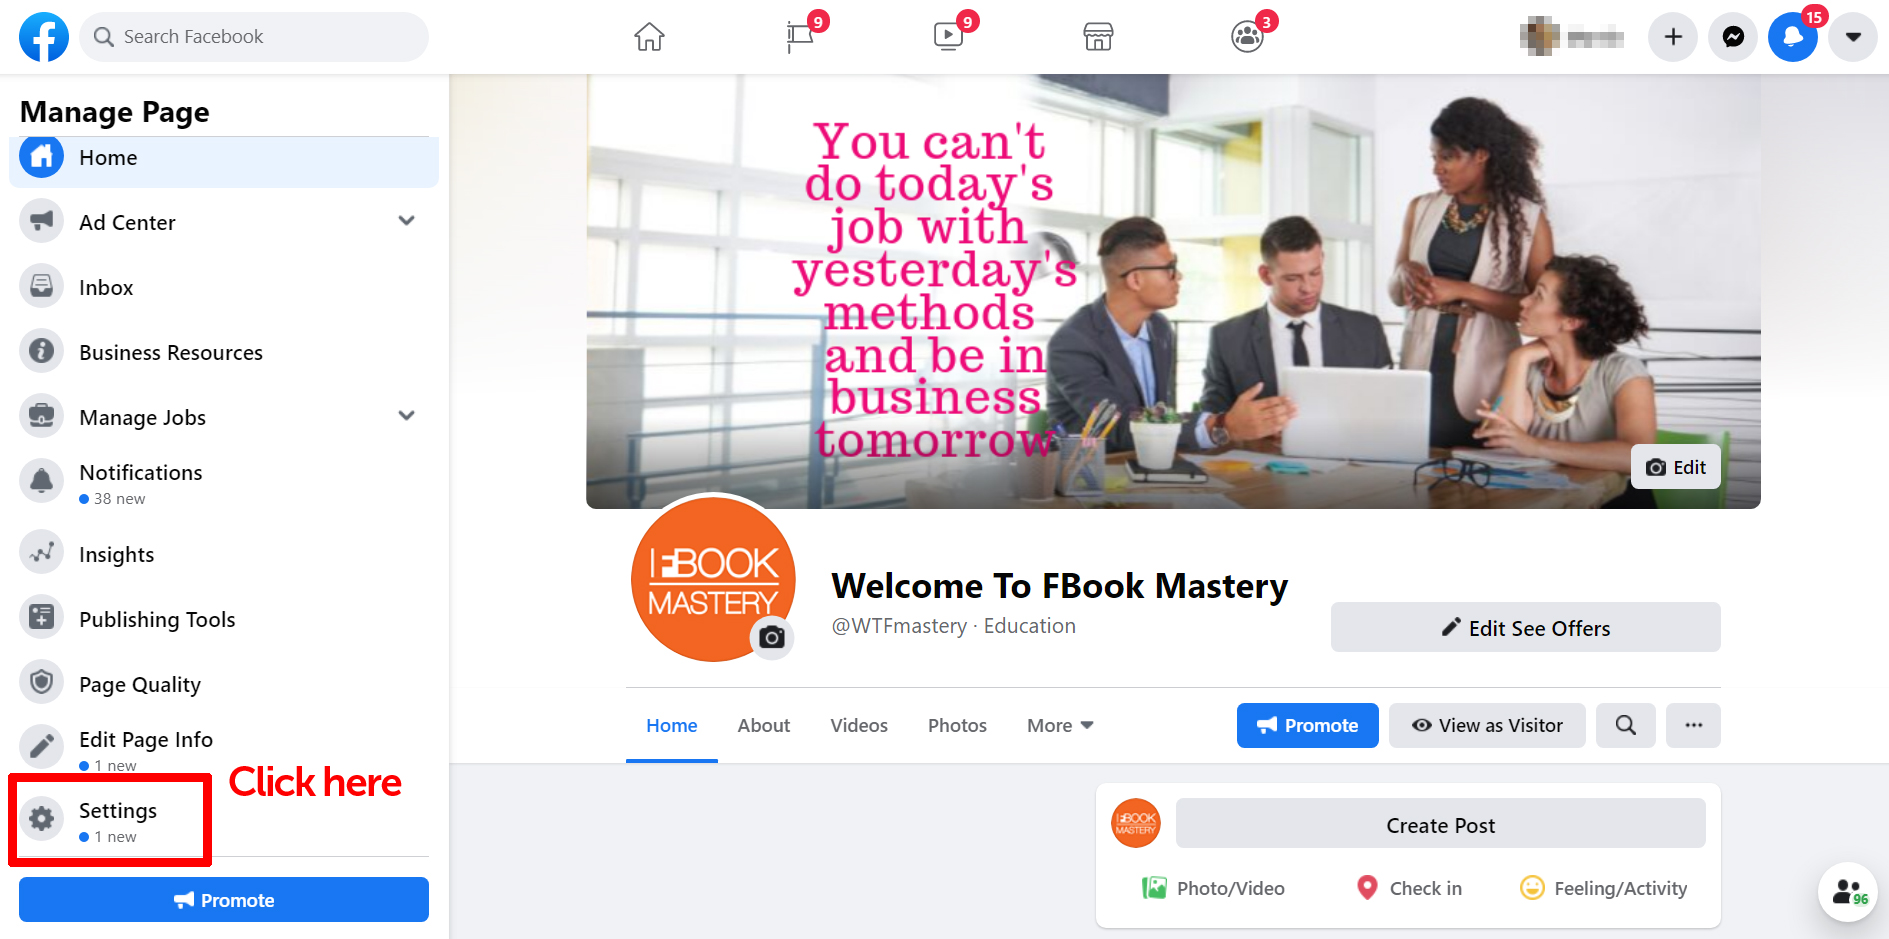 Facebook Page How To Add Admin To Your Facebook Page In 21 Fb Mastery